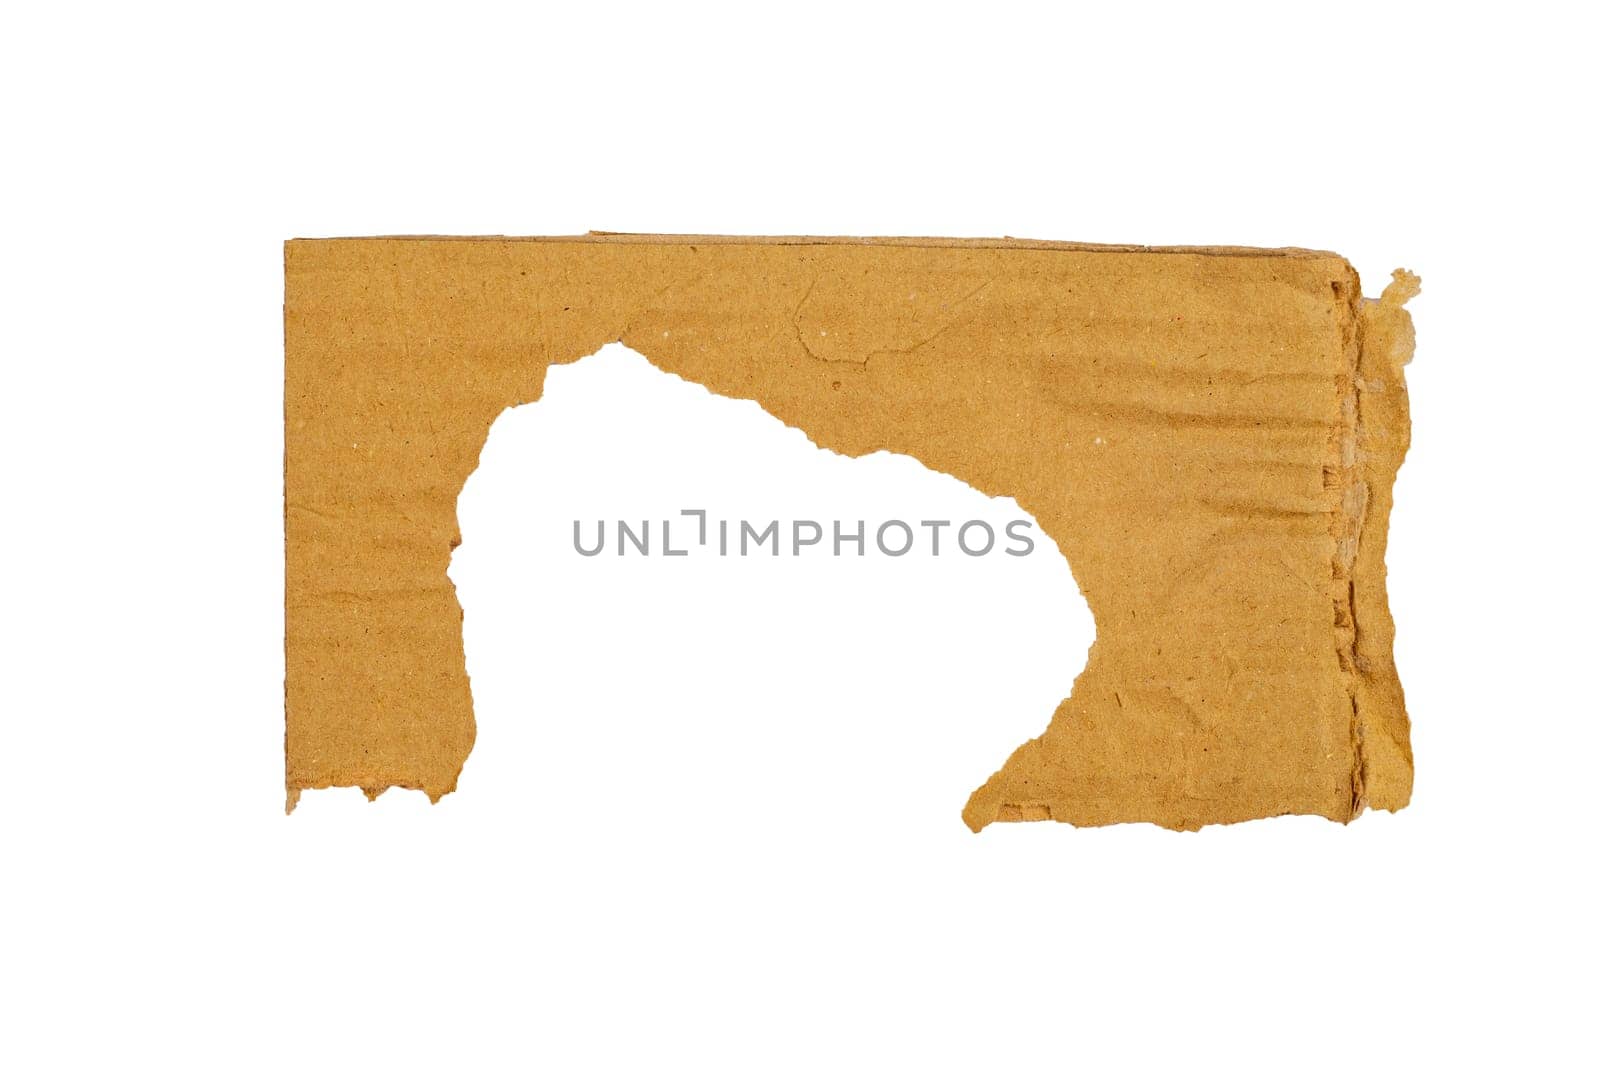 Old Ripped paper. Carton Piece, Ripped Kraft Paper Wallpaper, Brown Wrapping Vintage Paper Isolated Top View